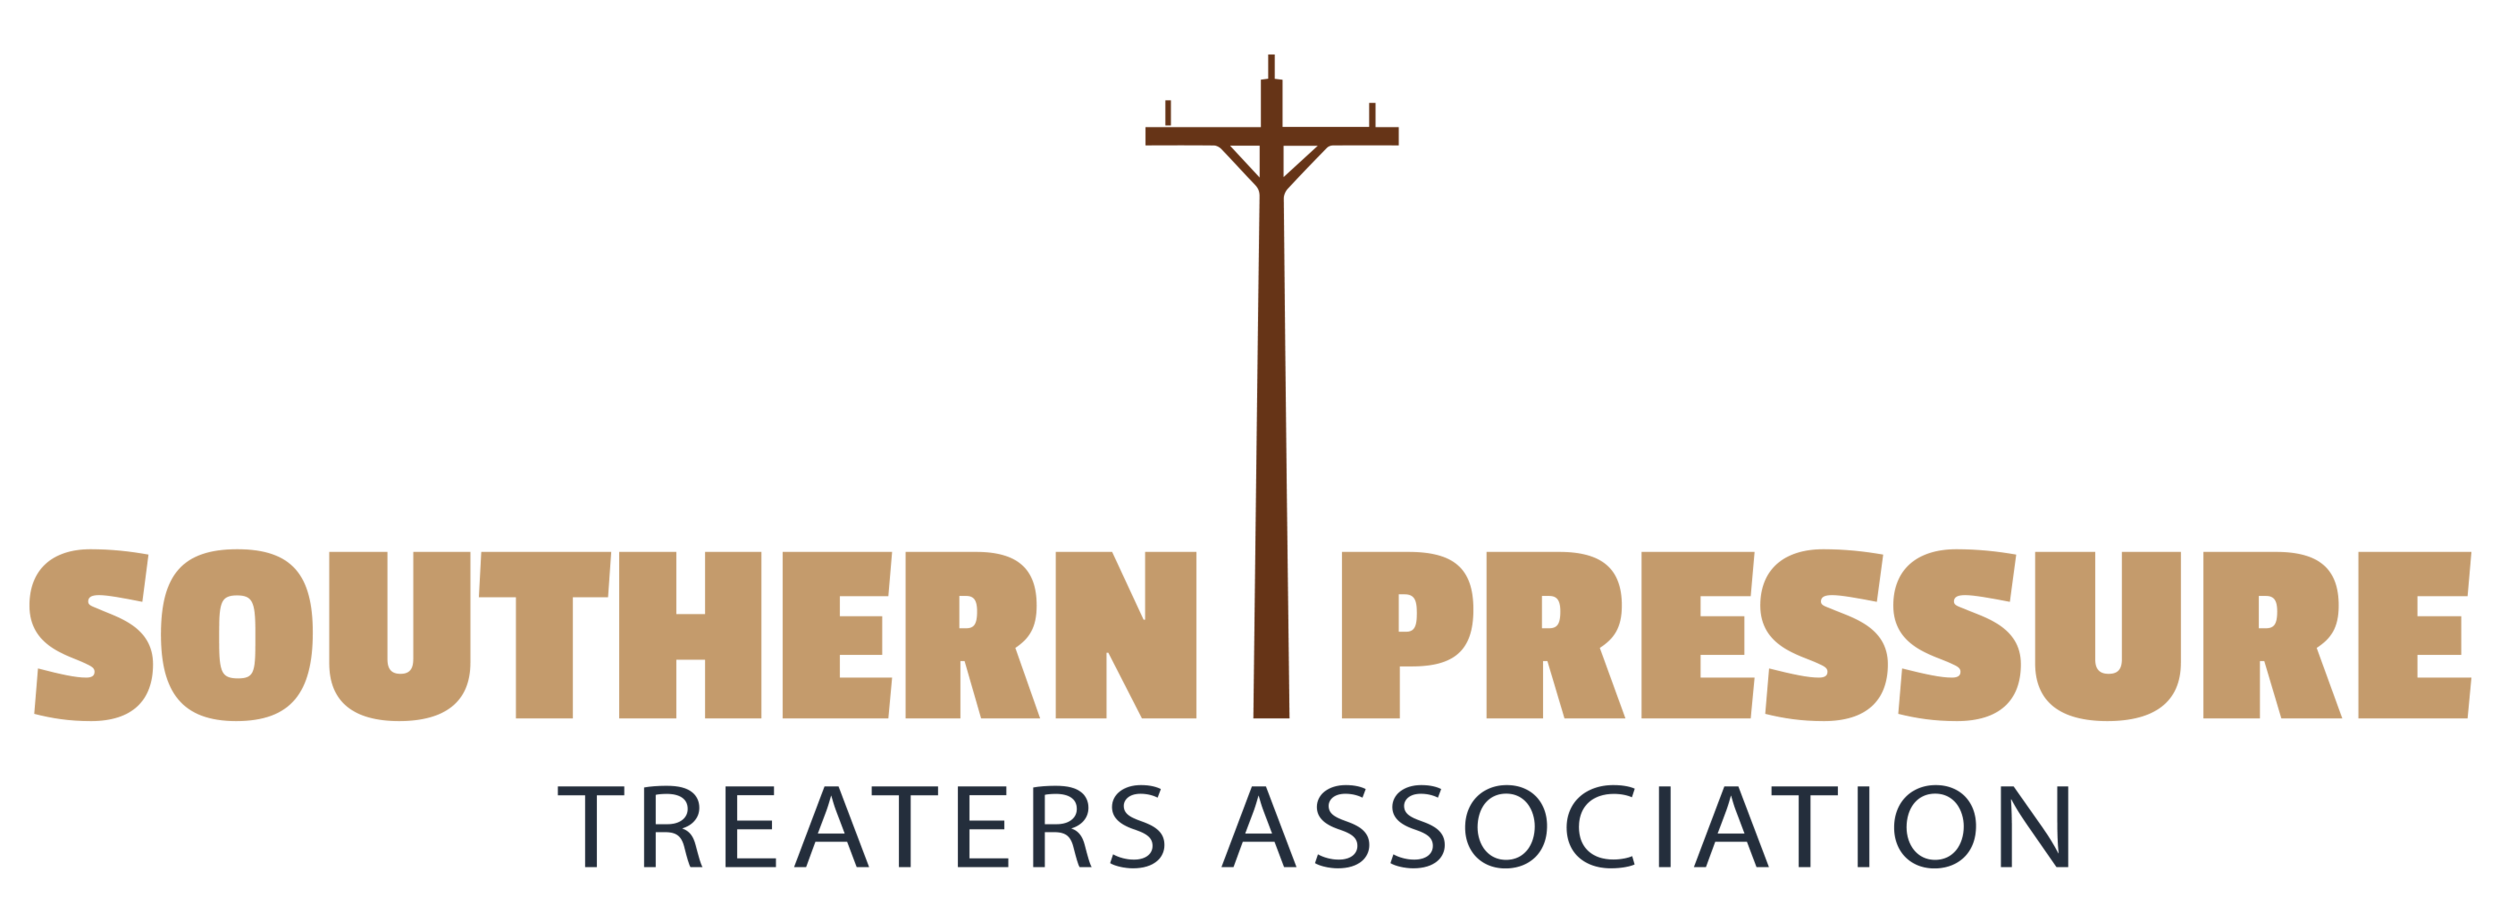 Southern Pressure Treaters Association